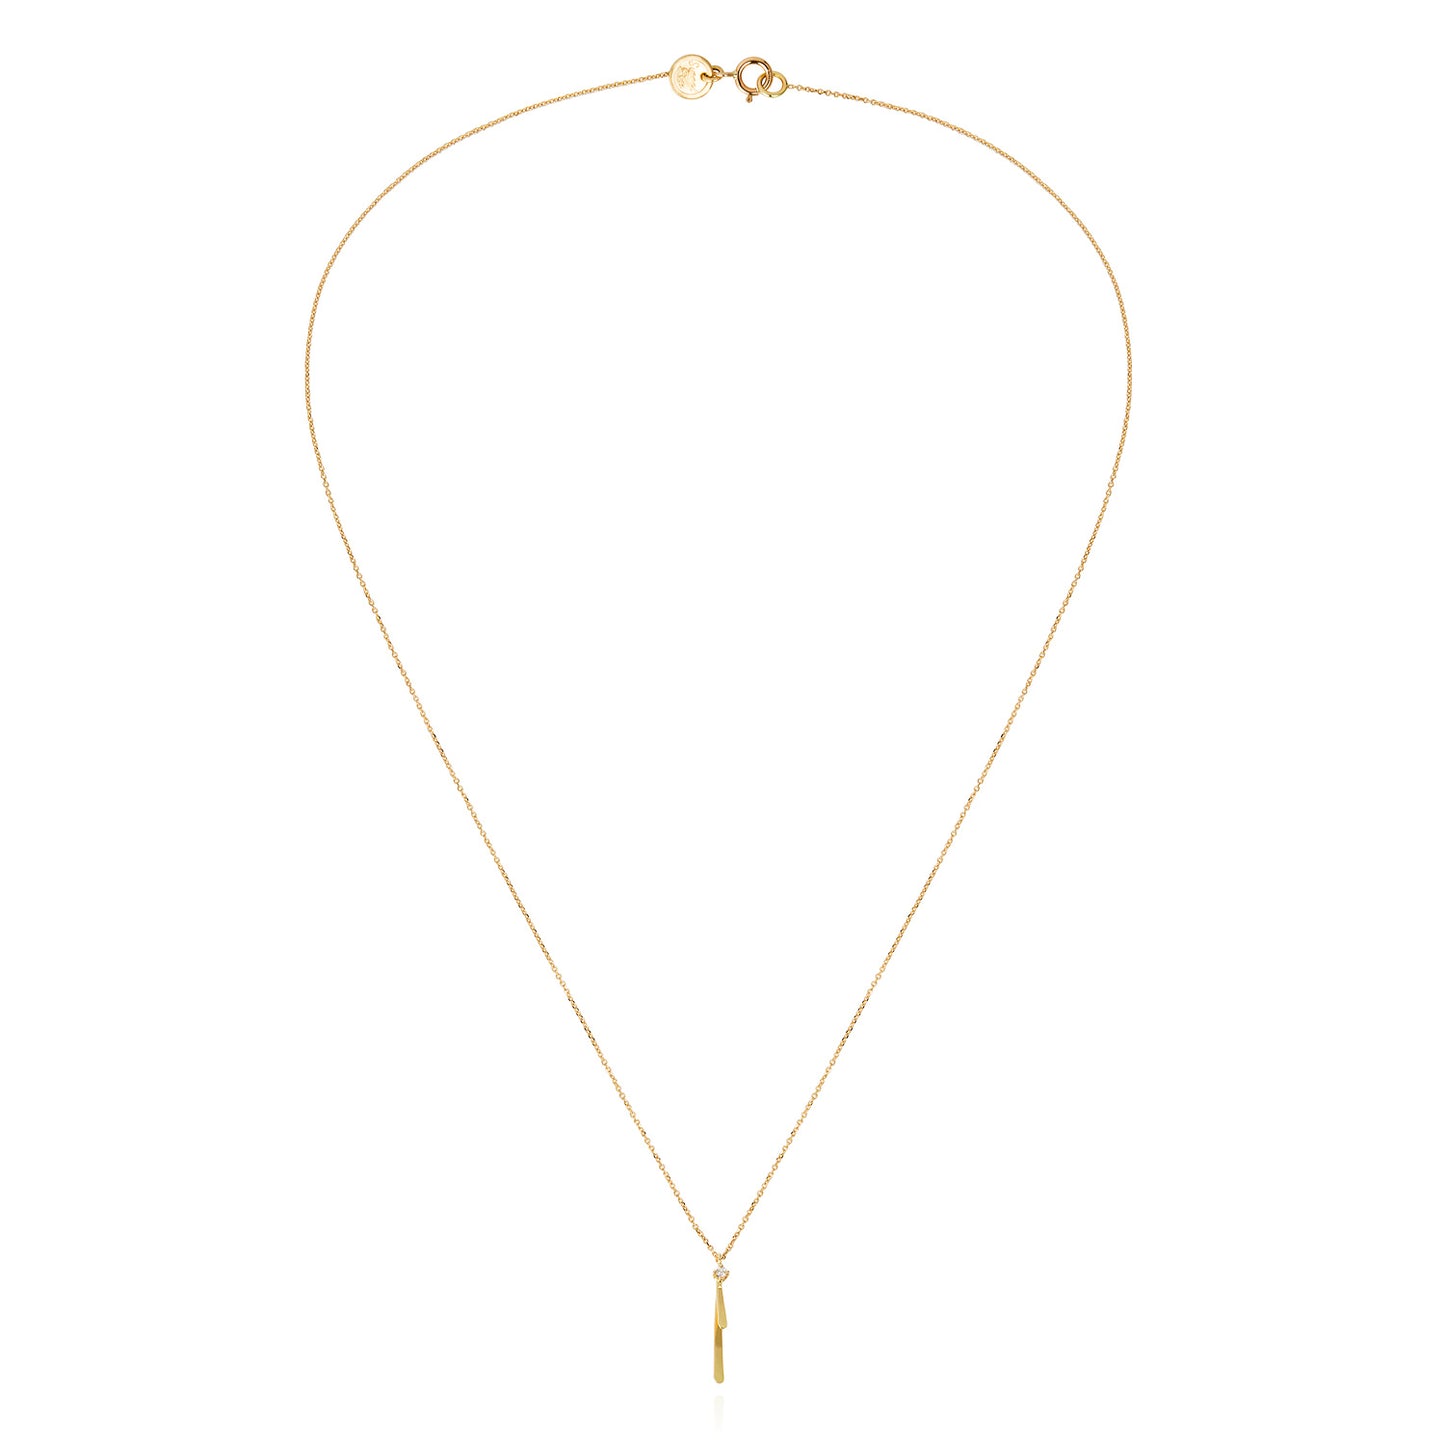 18ct gold fine chain necklace with golden bar and diamond pendant 